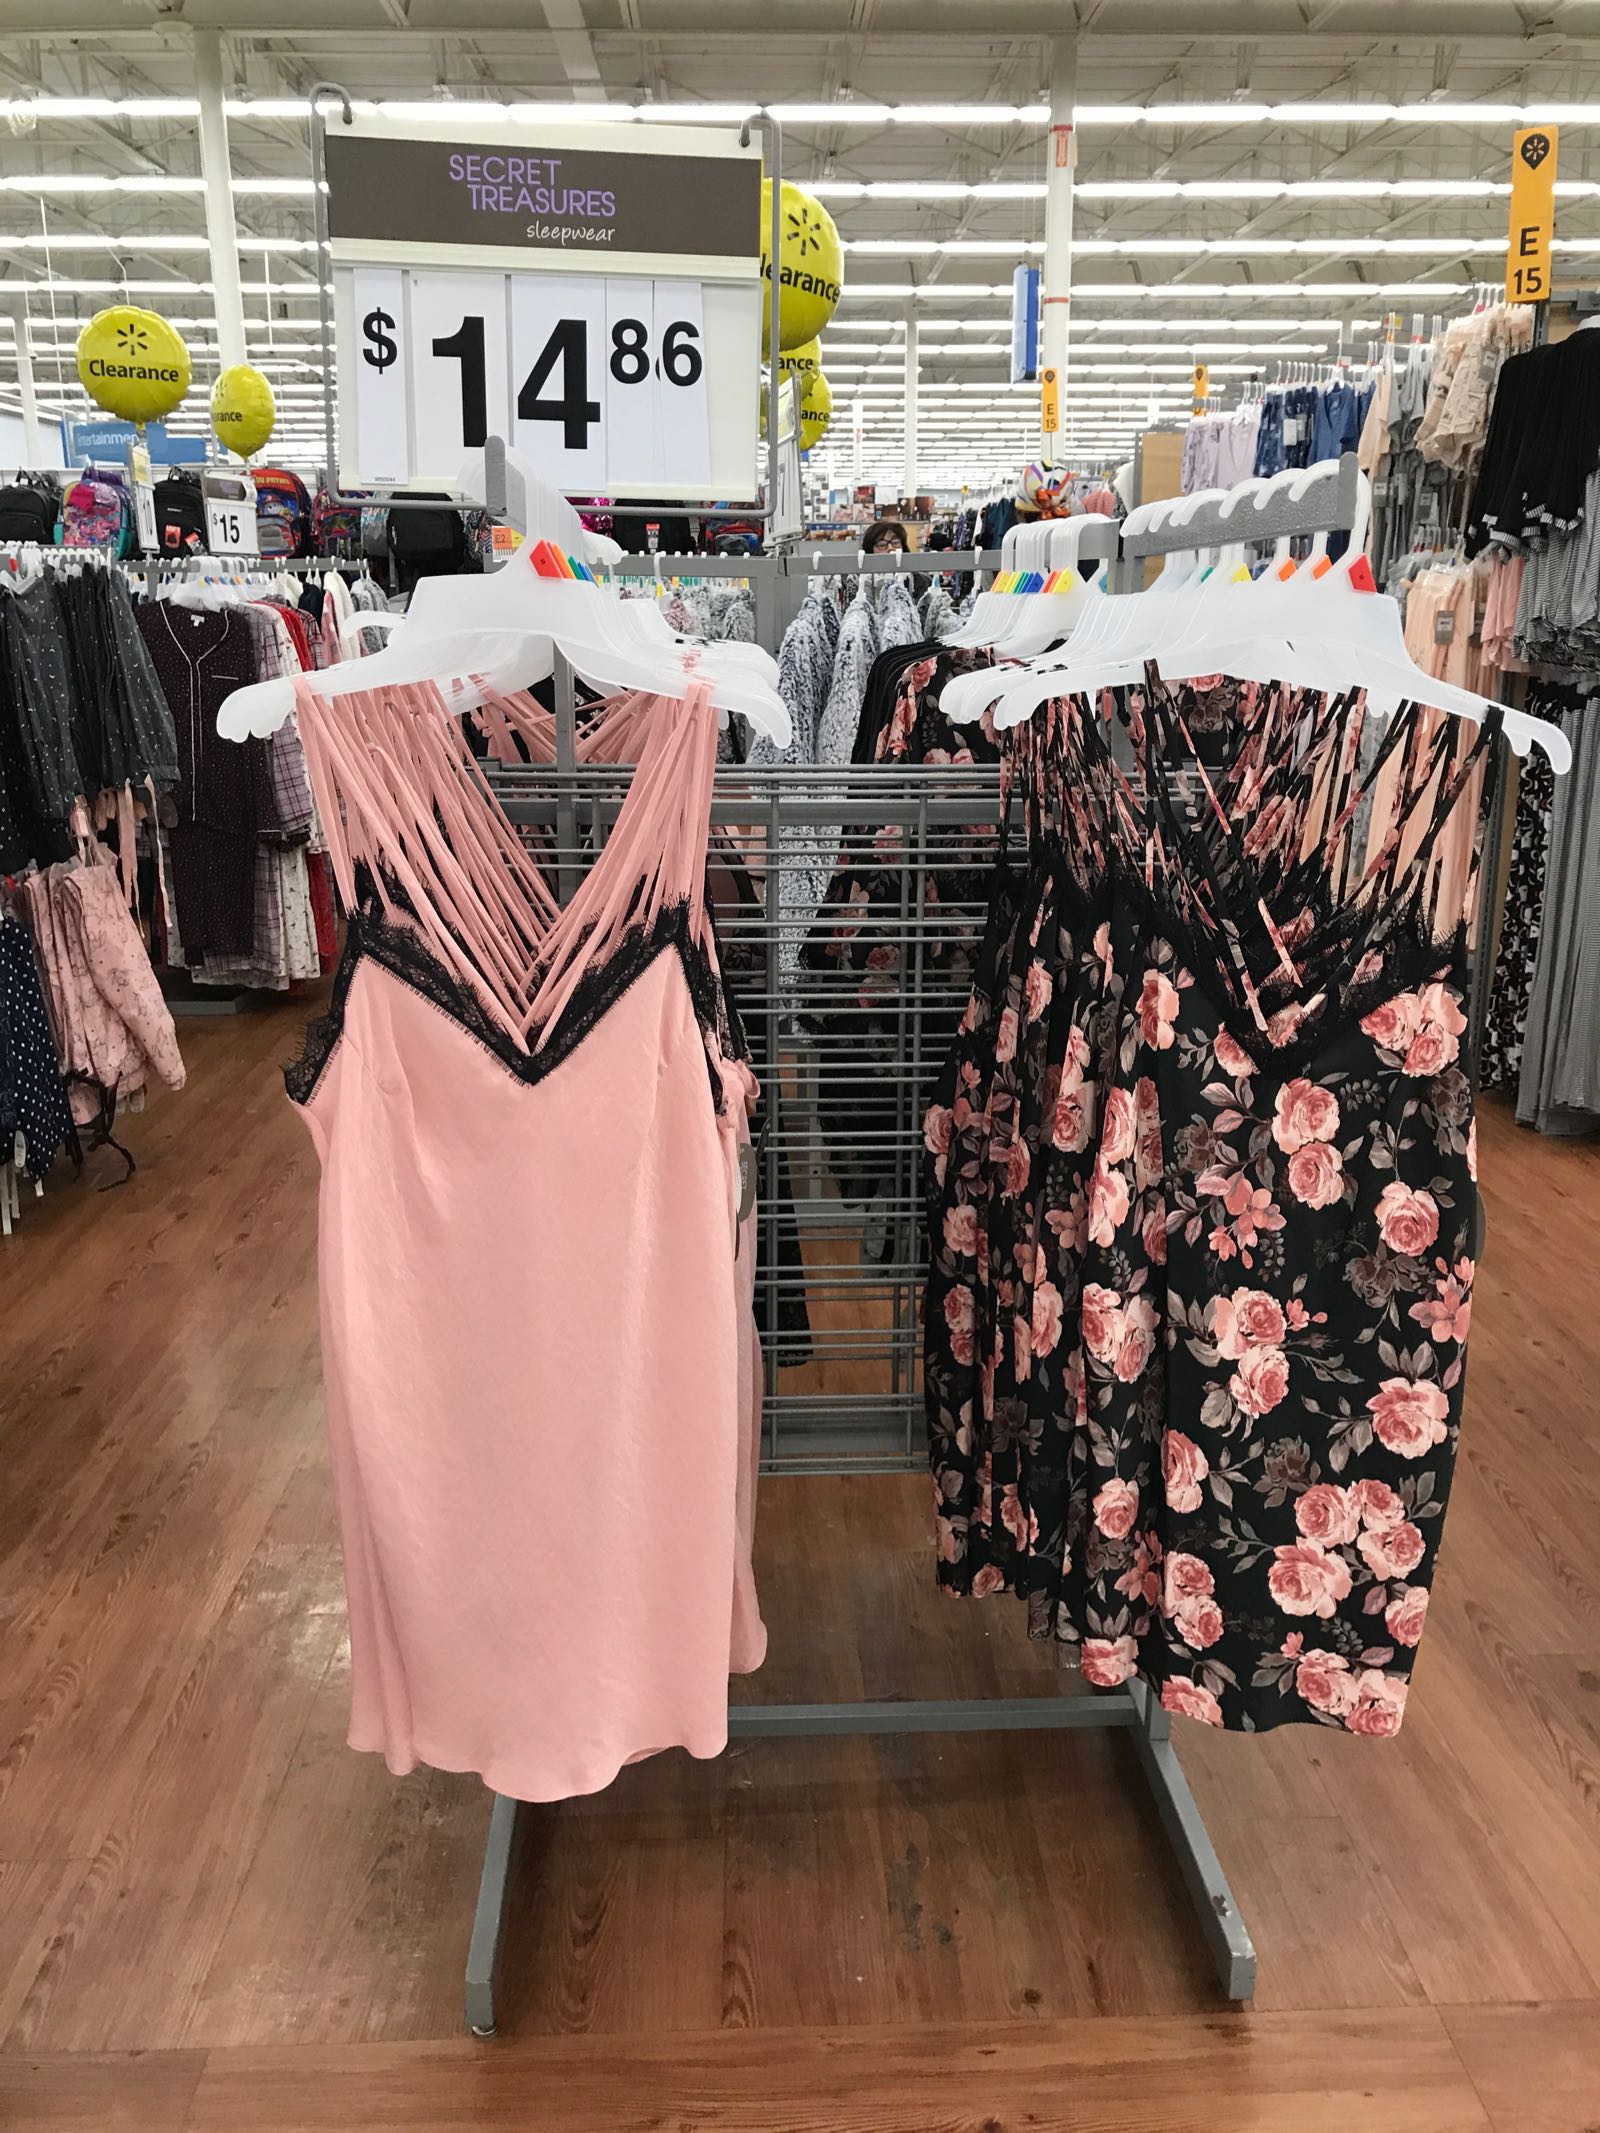 Cute slips for Valentine's Day at Walmart!!